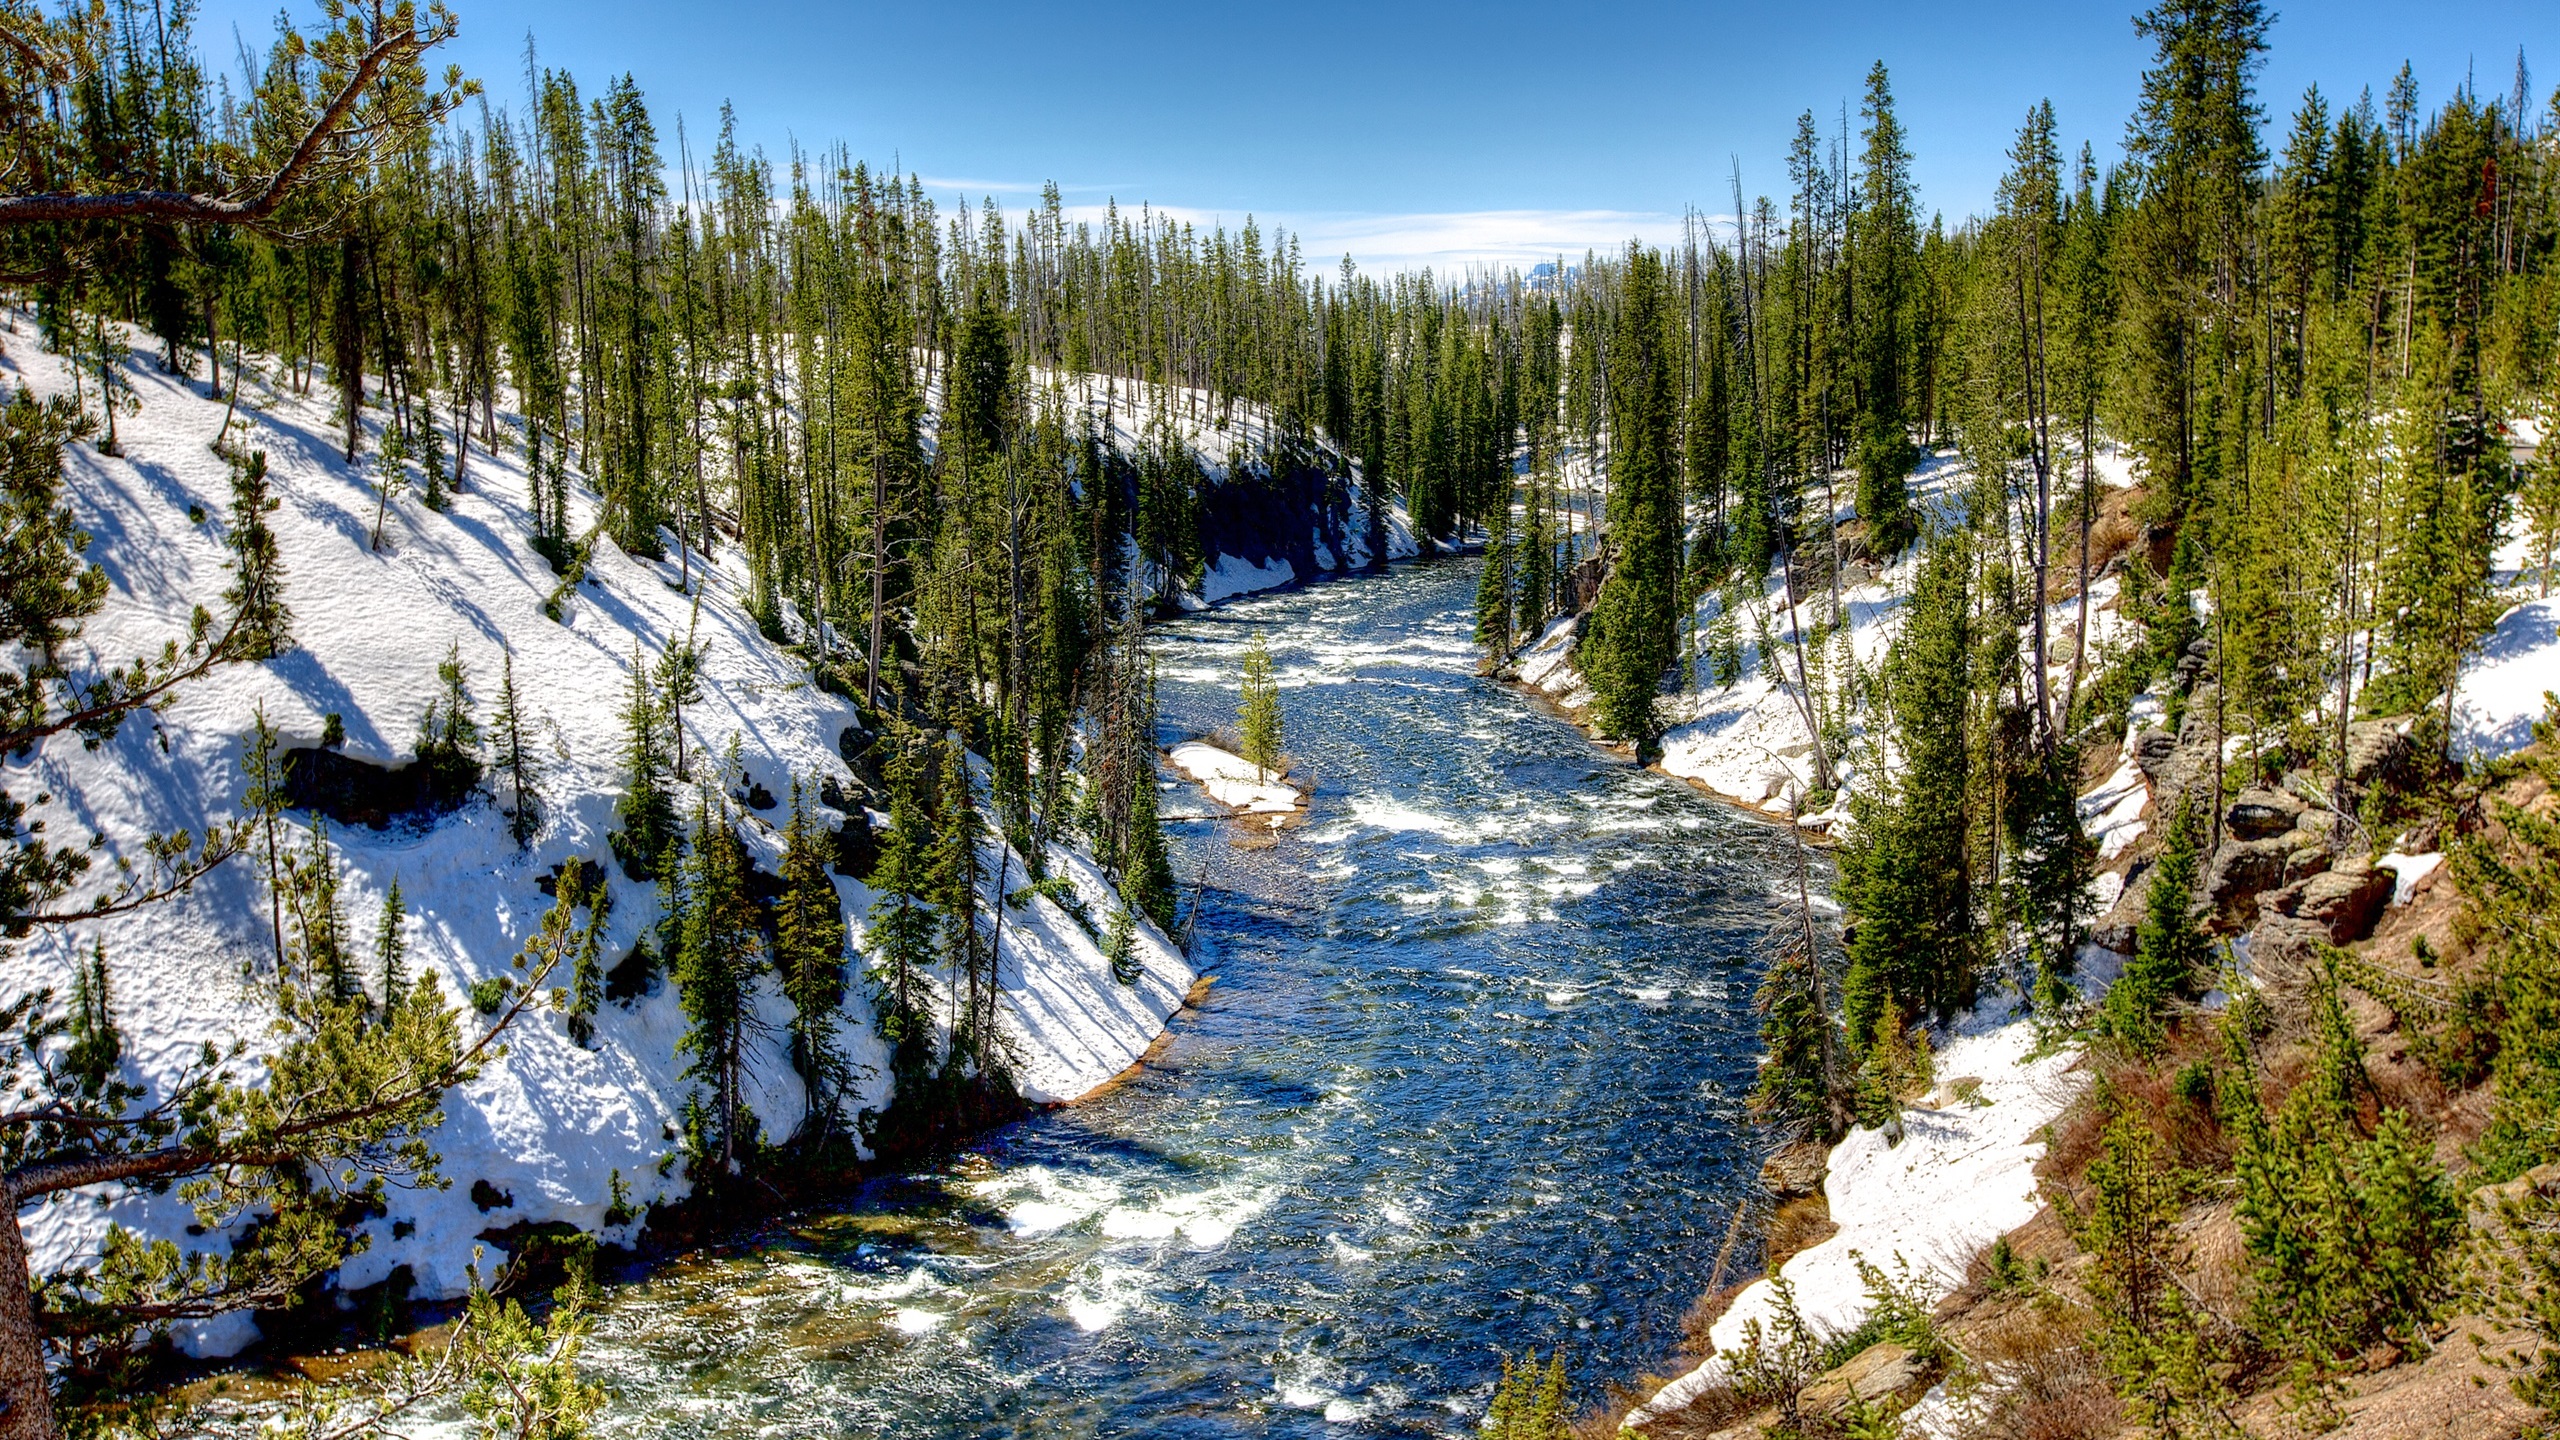 General 2560x1440 river trees sky snow nature landscape winter Yellowstone National Park USA